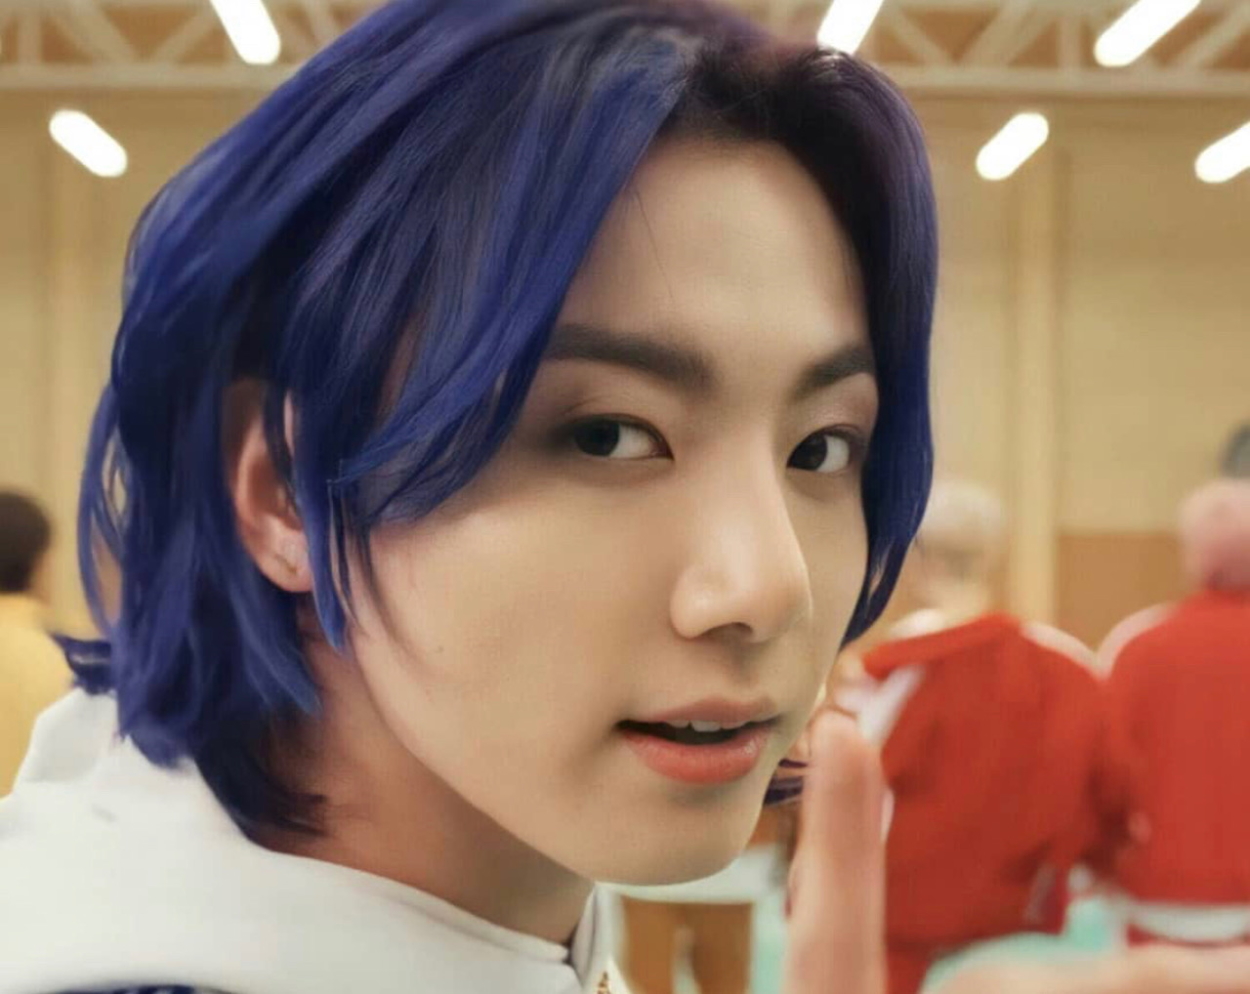 BTS Jungkook's Blue Hair in "Butter" Music Video - wide 9